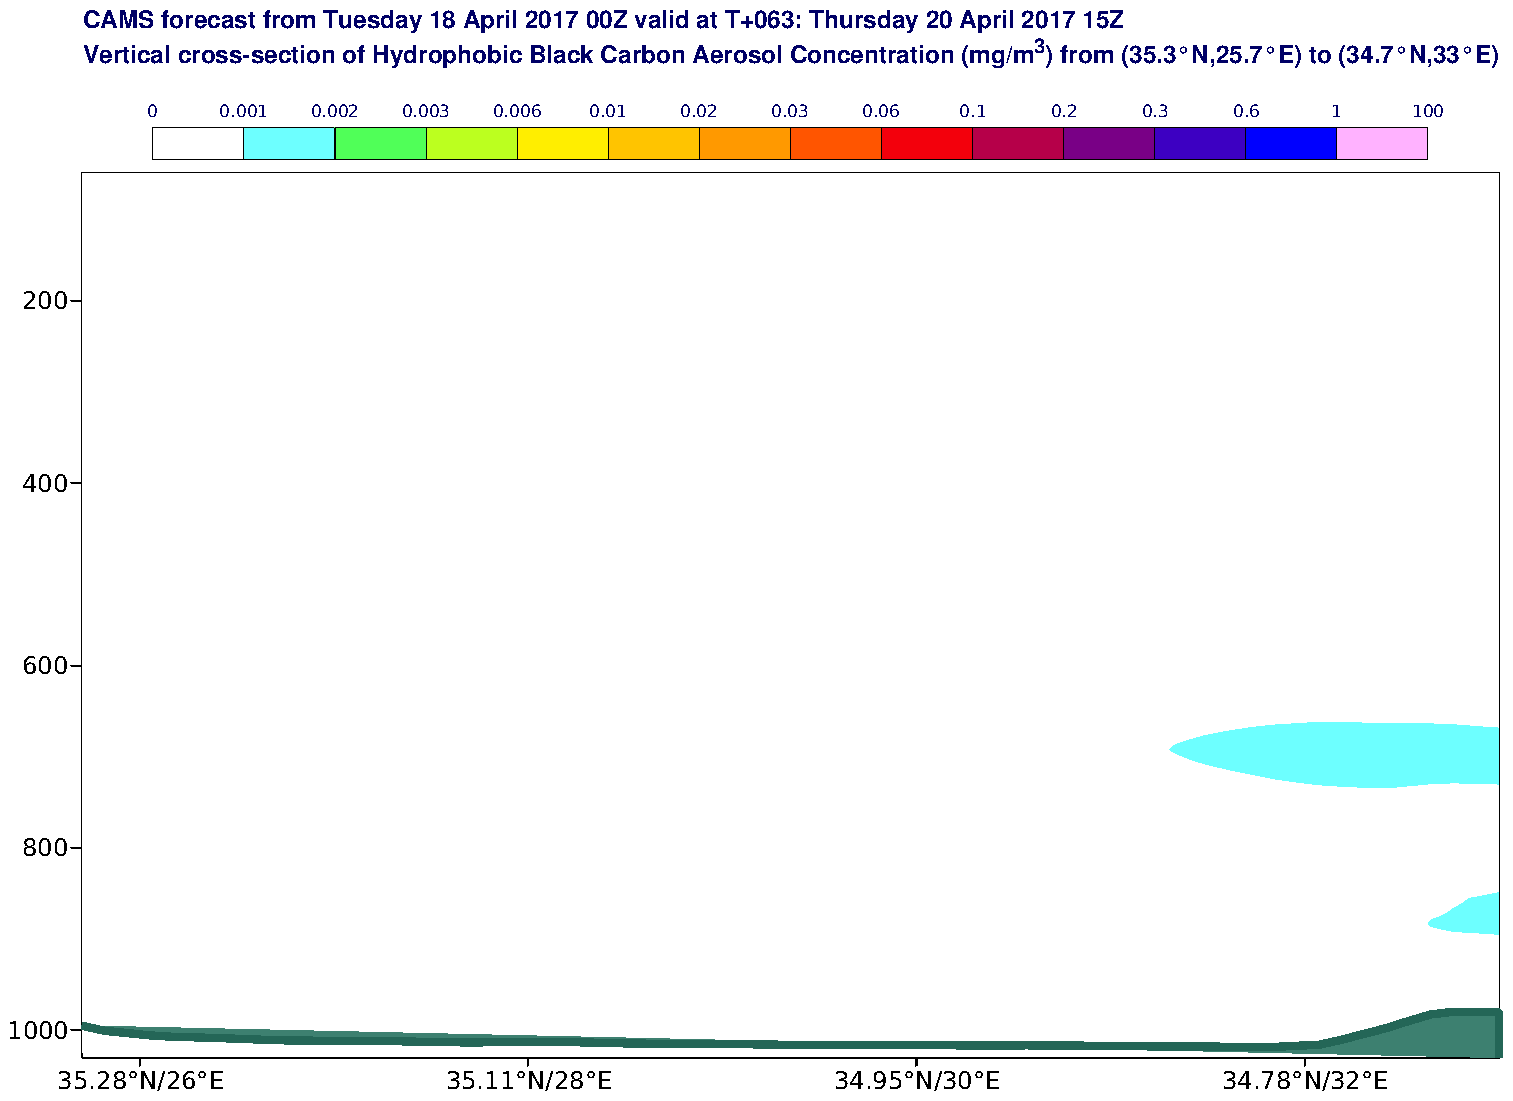 Vertical cross-section of Hydrophobic Black Carbon Aerosol Concentration (mg/m3) valid at T63 - 2017-04-20 15:00